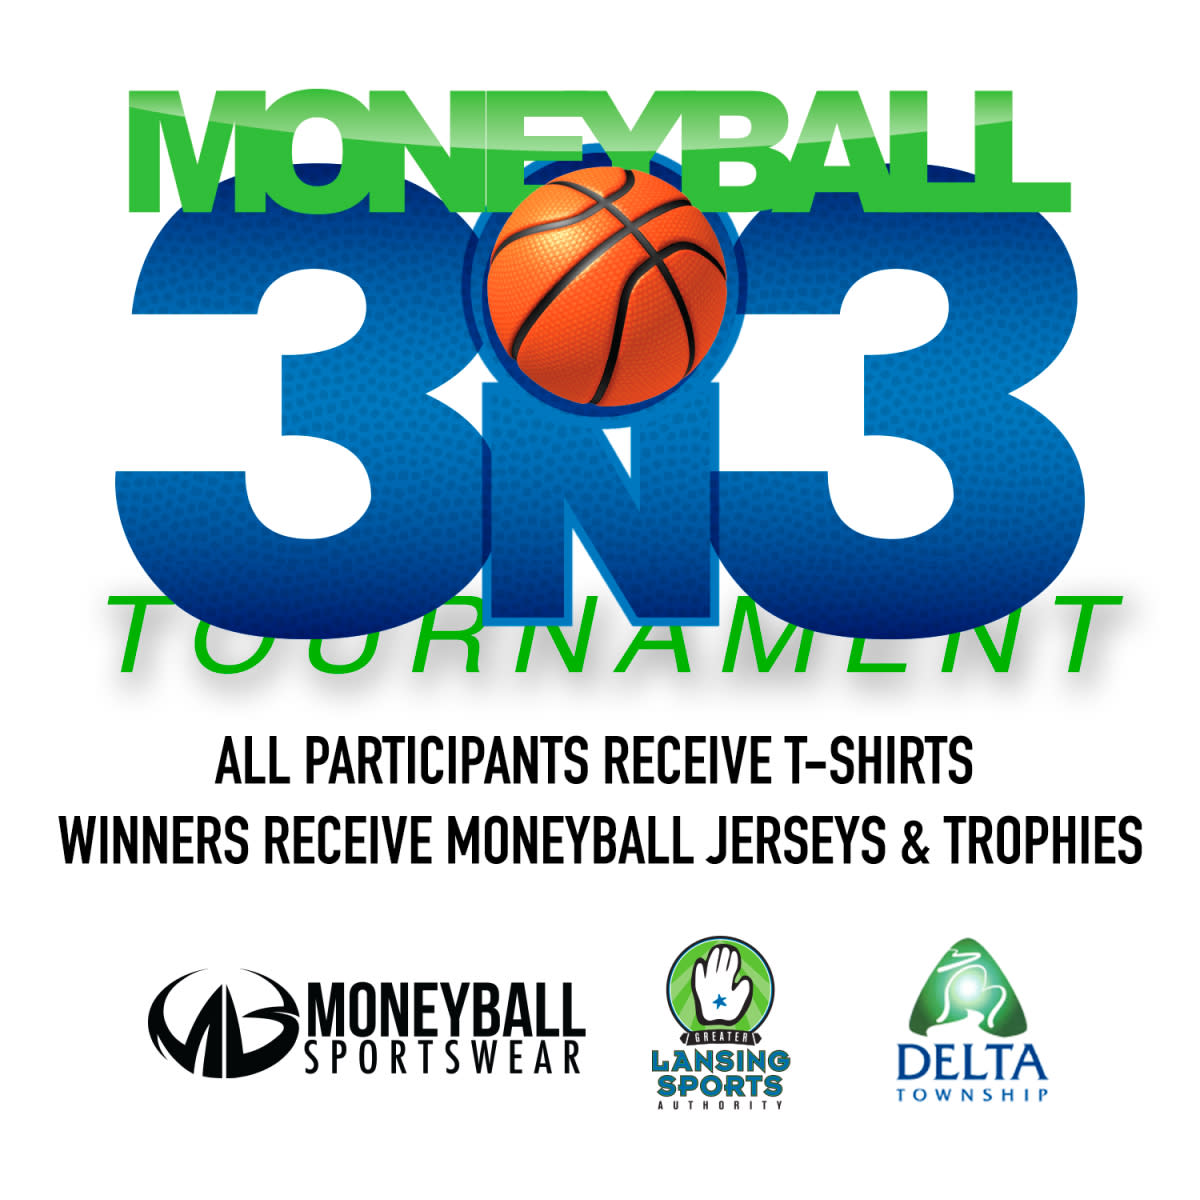 Moneyball 3 on 3 Tournament Greater Lansing Sports Authority